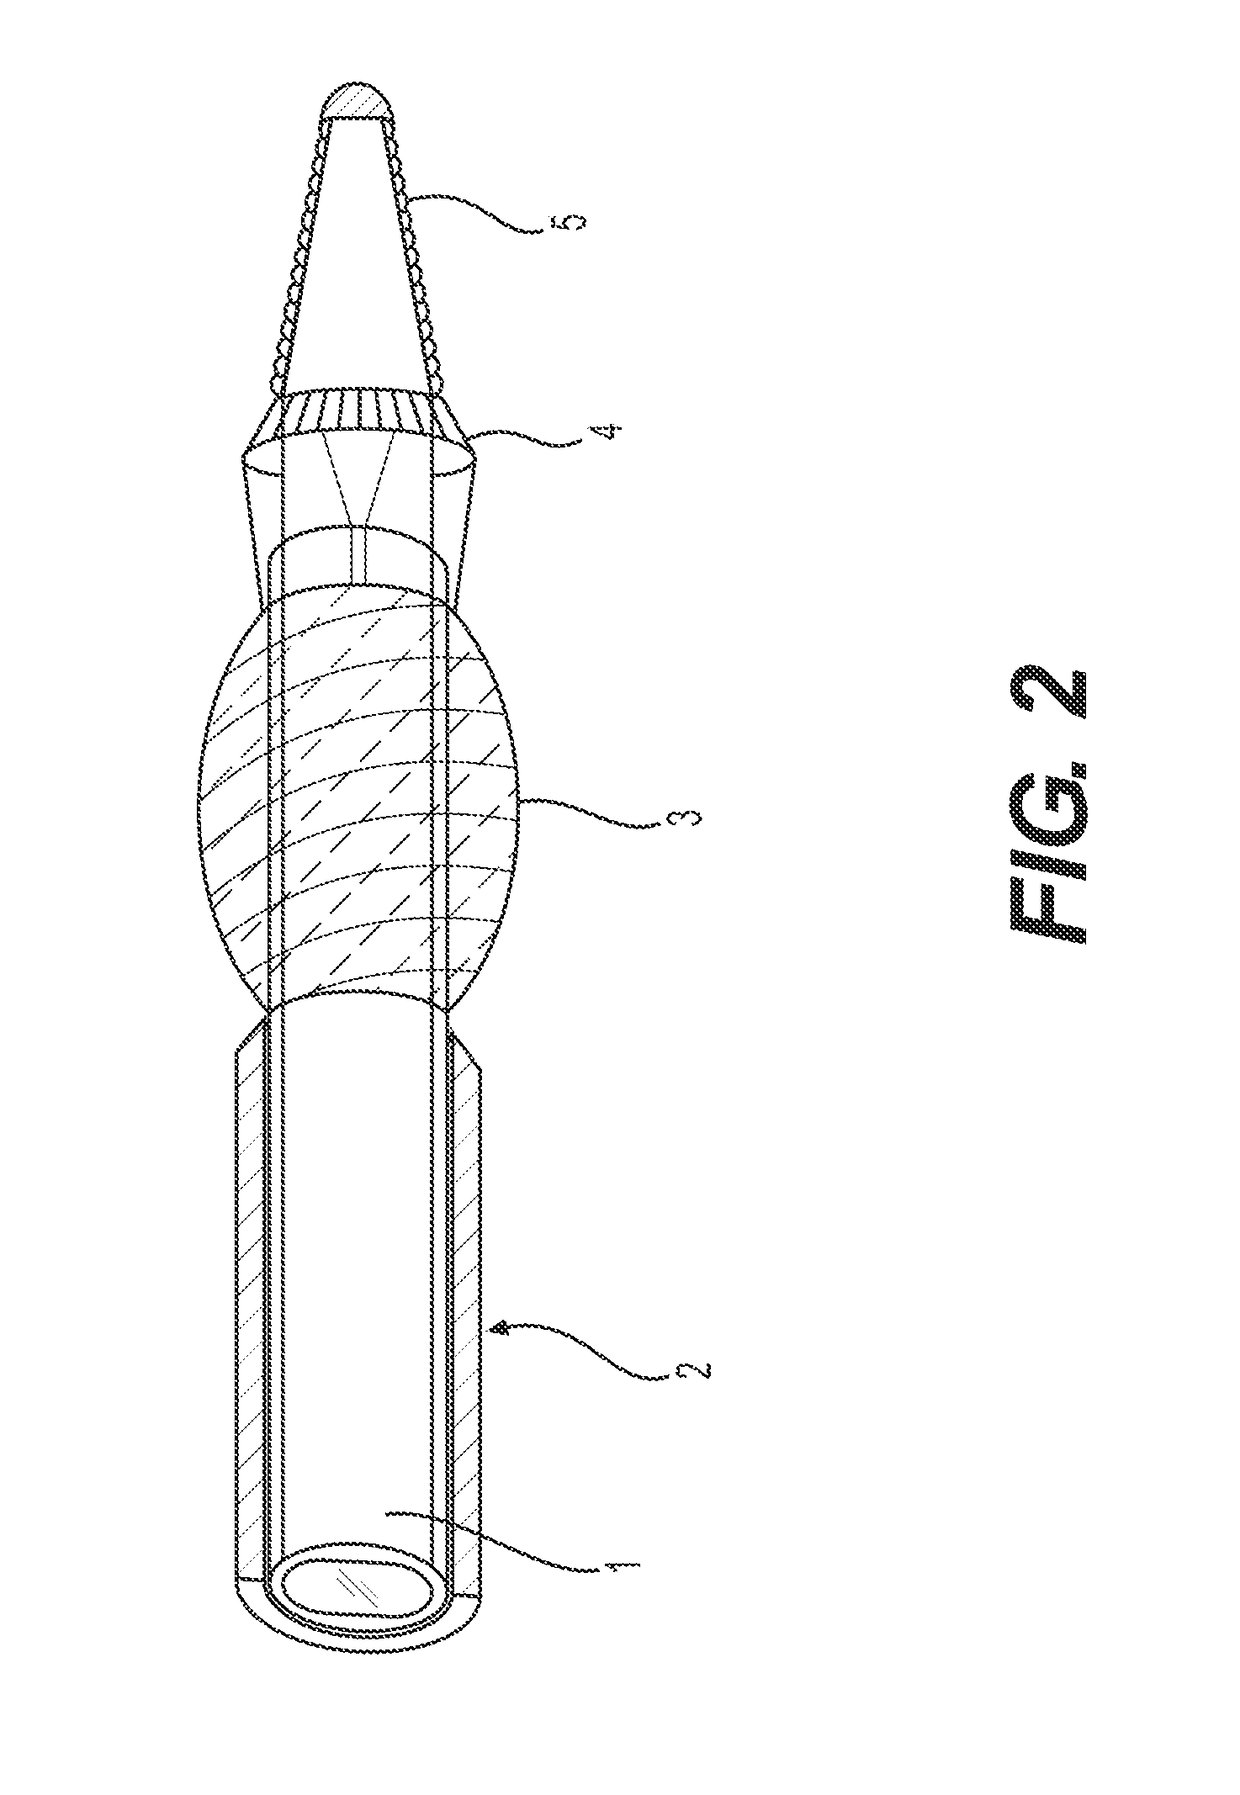 Devices and methods for treating occlusion of the ophthalmic artery